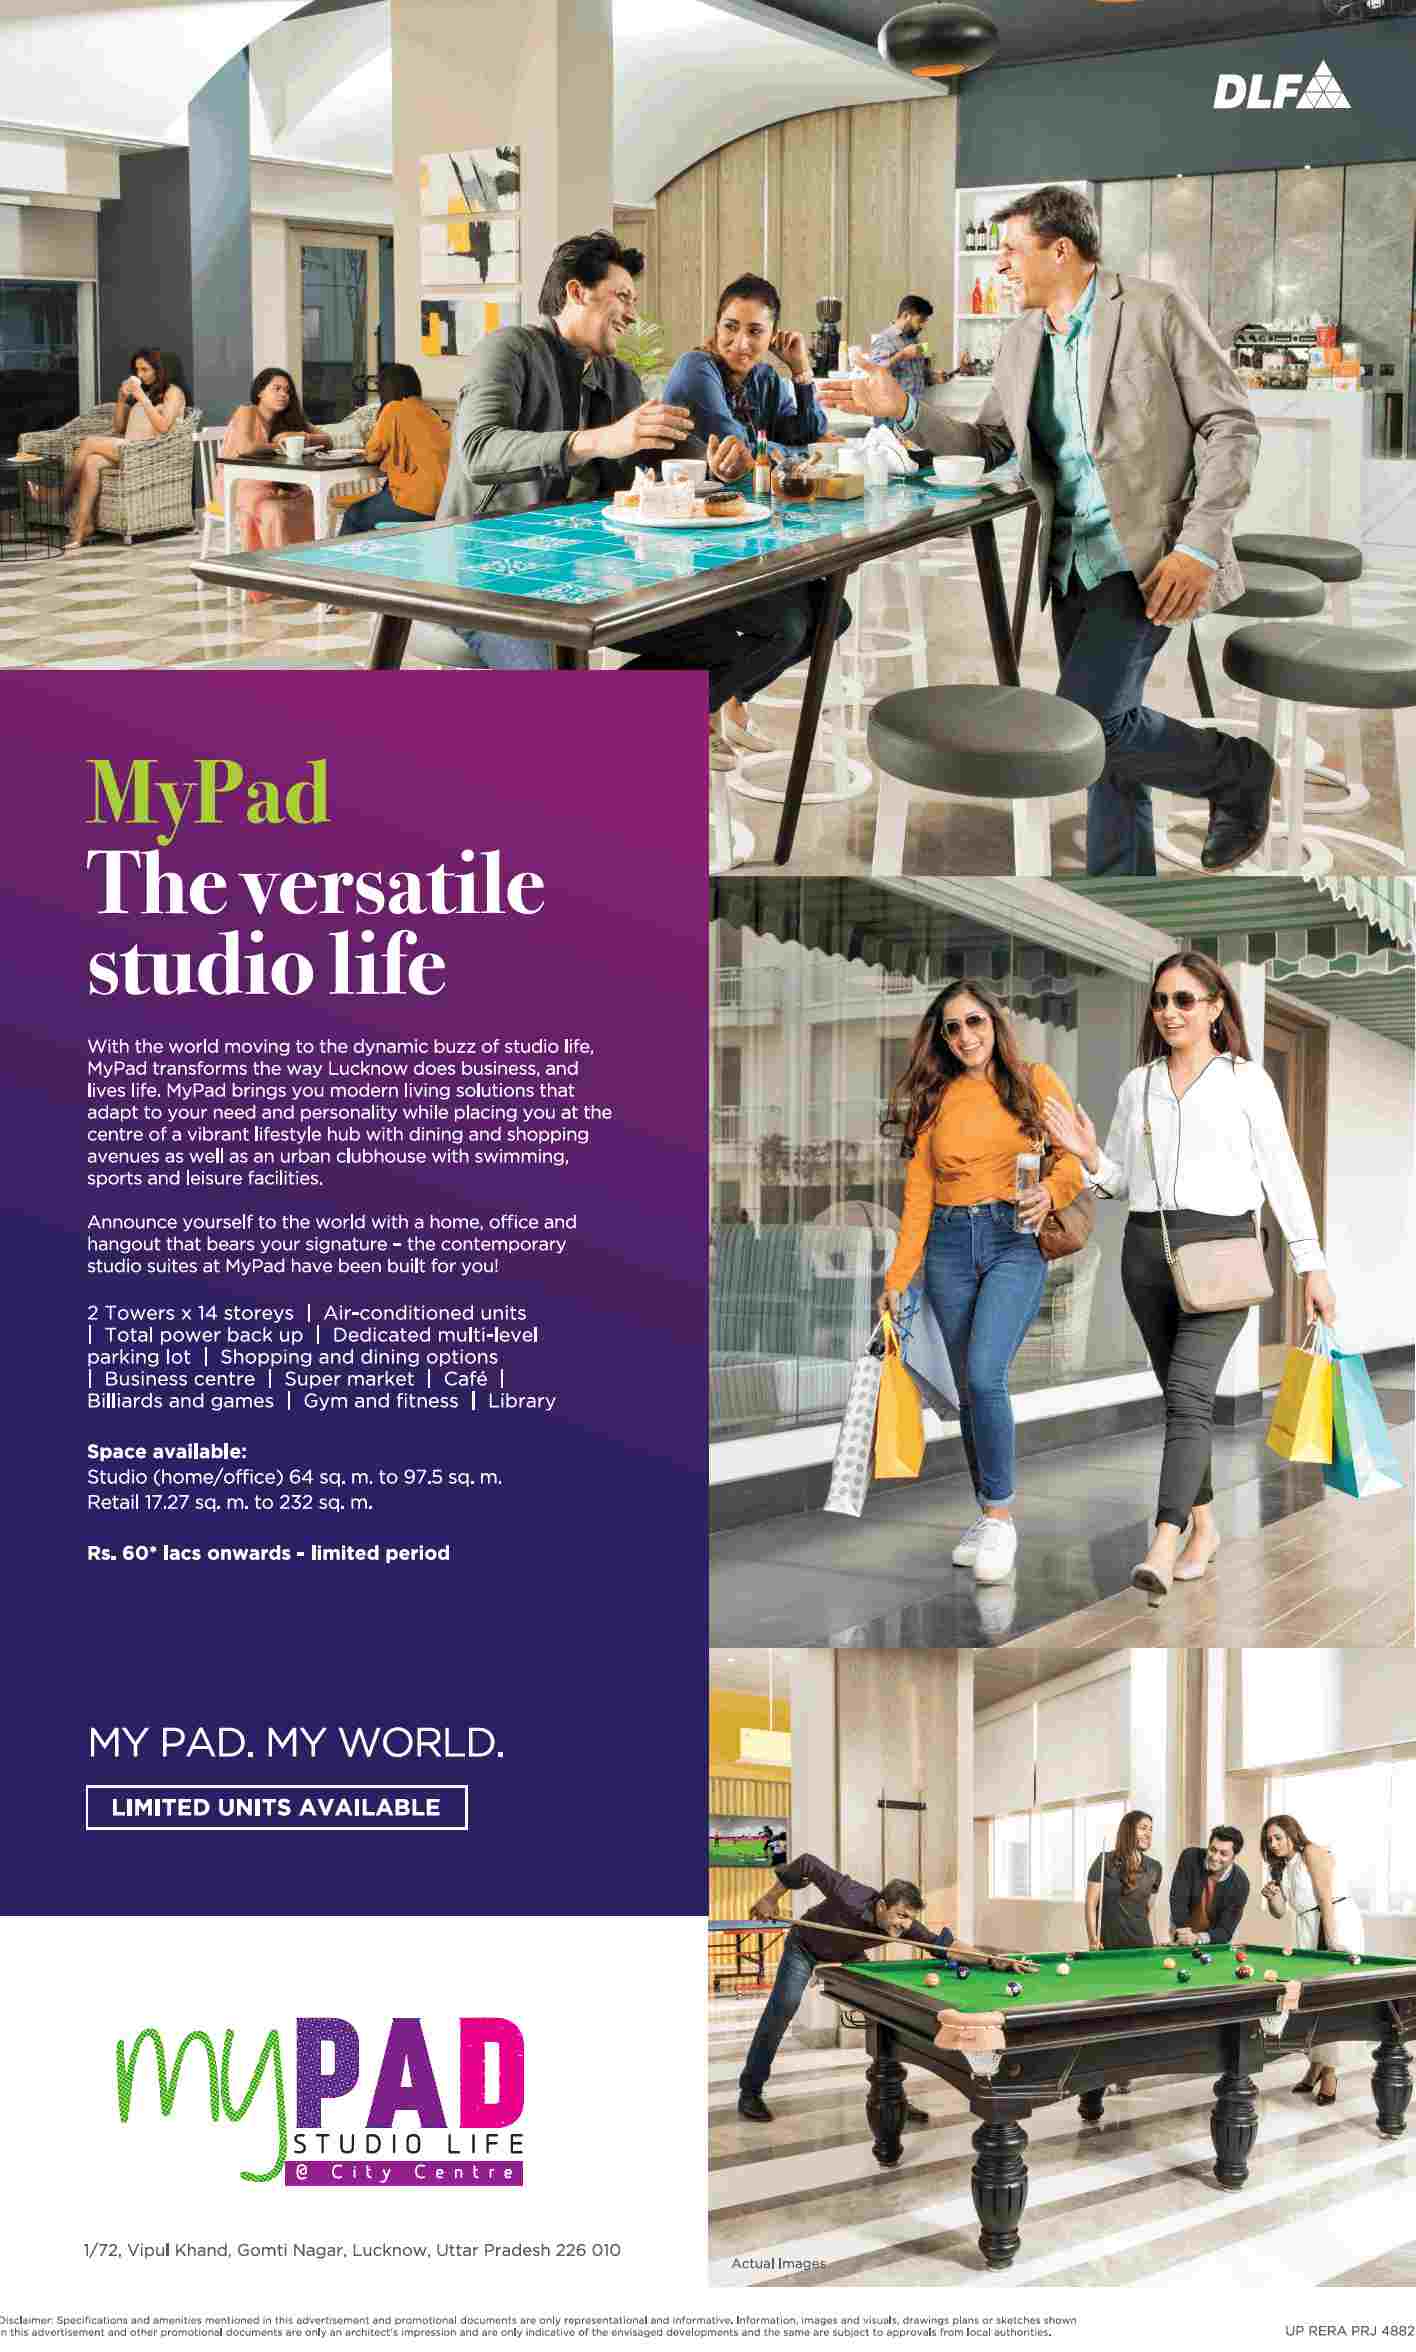 Experience the versatile studio life at DLF My Pad in Lucknow Update